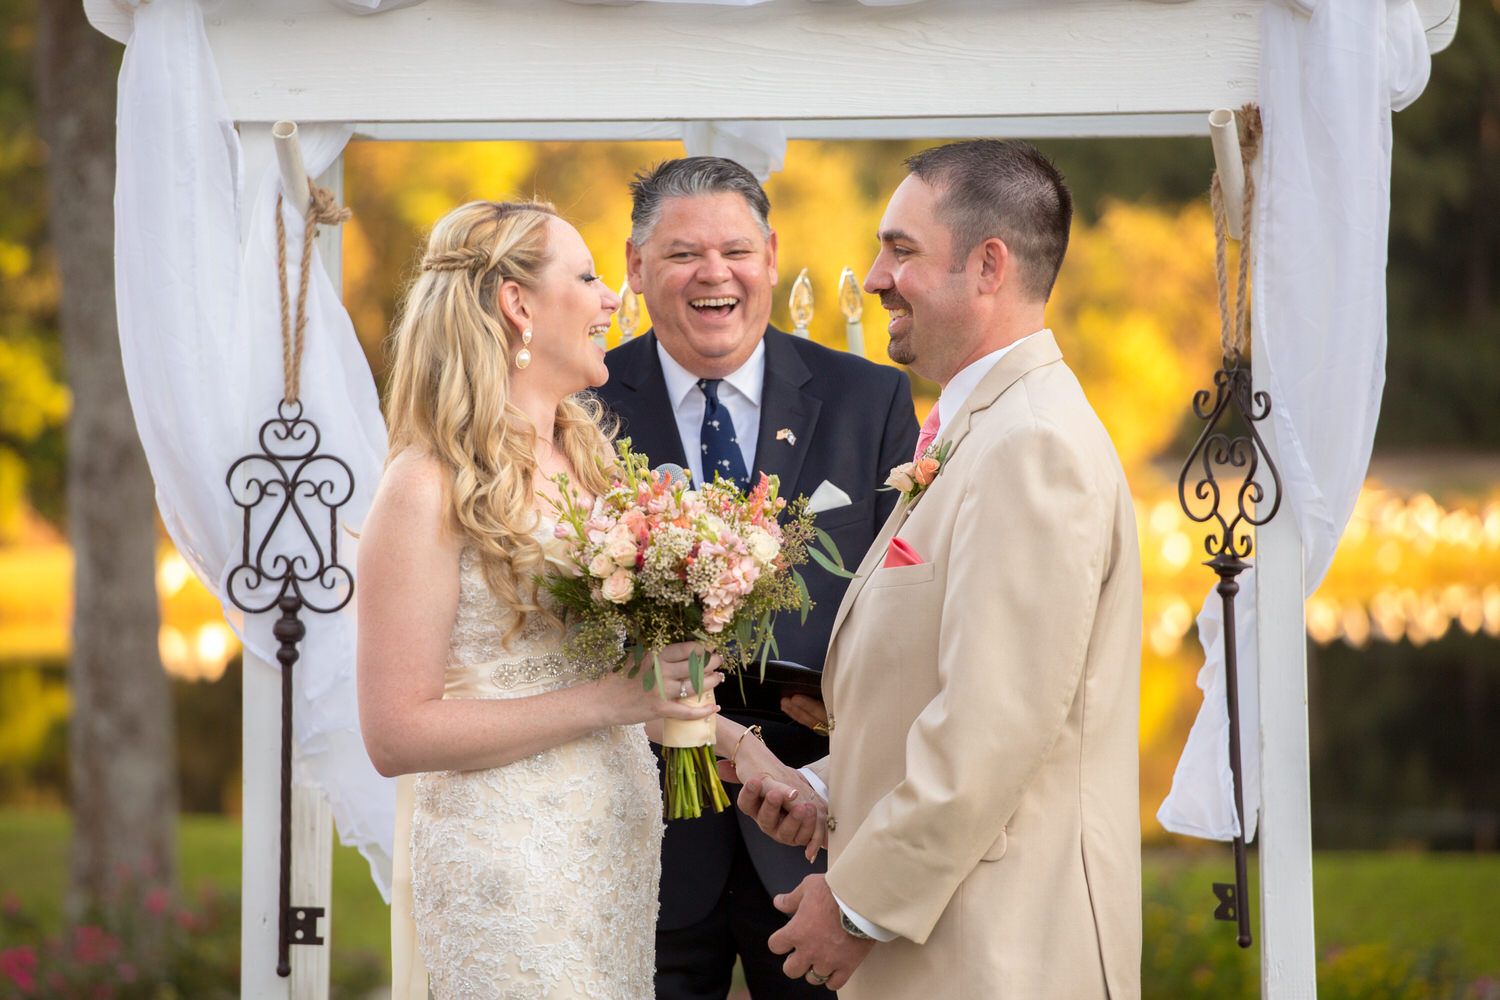 Bride & Groom share a laugh during their wedding ceremony at Pawleys Plantation in Pawleys Island, SC. 